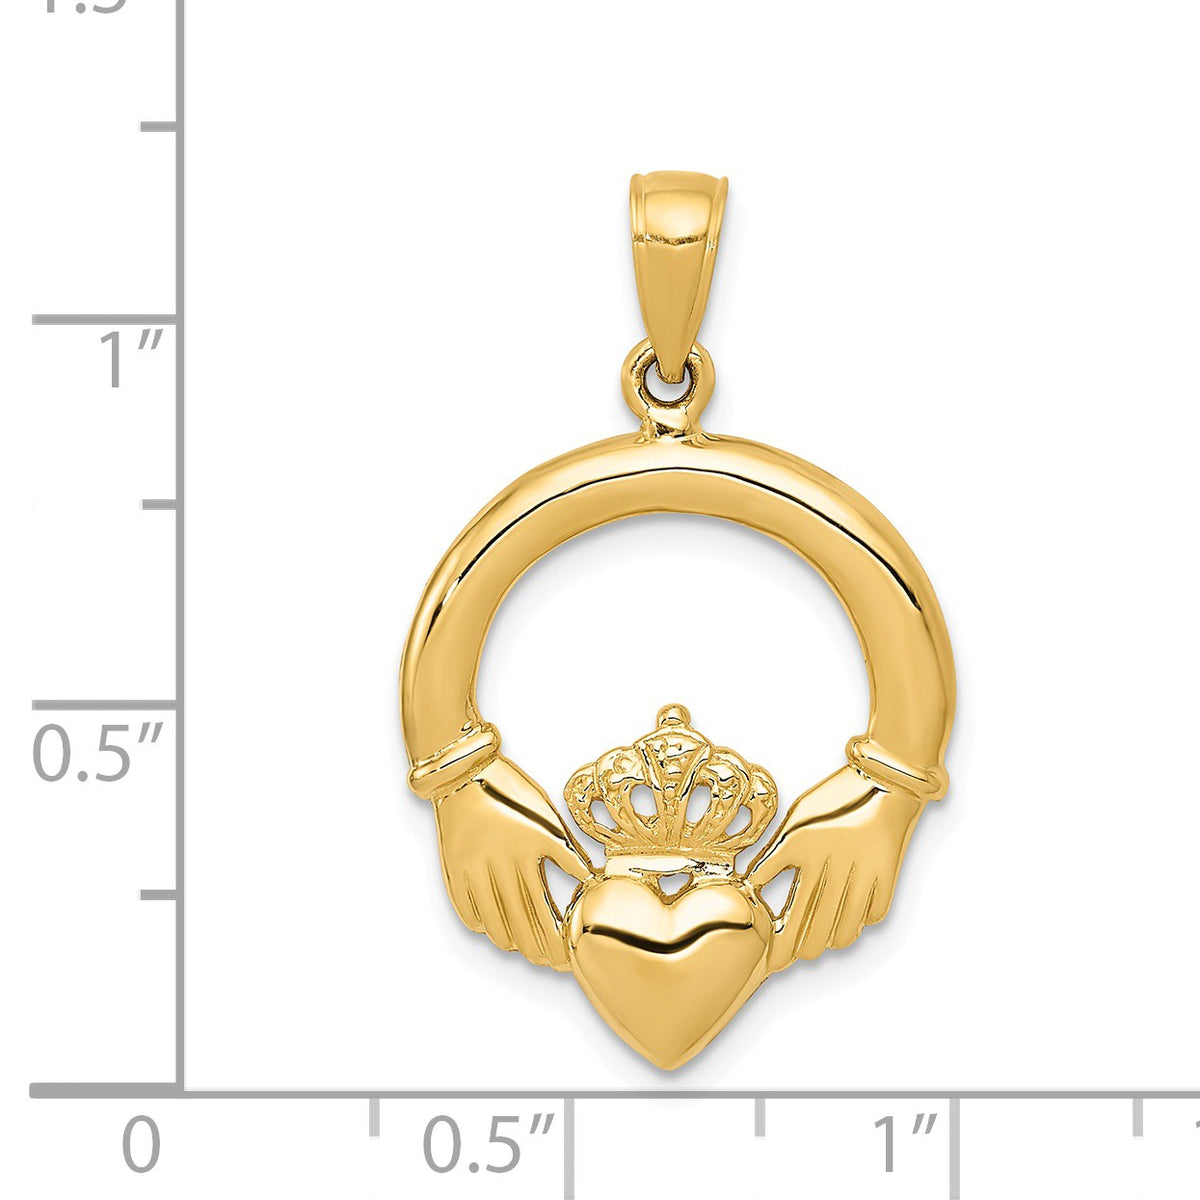 Alternate view of the 14k Yellow Gold Polished Claddagh Pendant, 18mm by The Black Bow Jewelry Co.